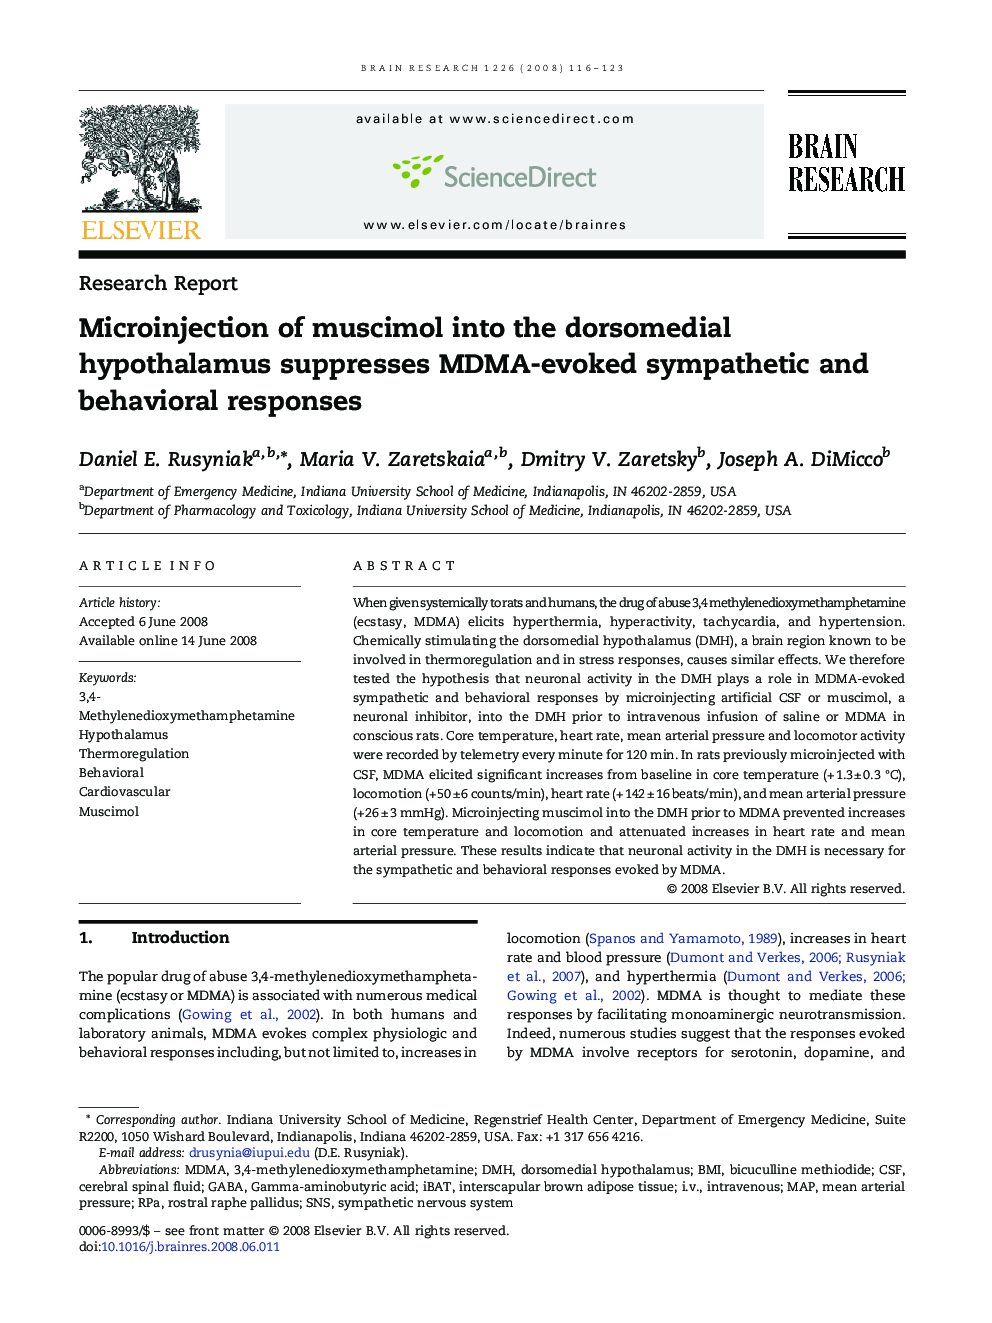 Microinjection of muscimol into the dorsomedial hypothalamus suppresses MDMA-evoked sympathetic and behavioral responses